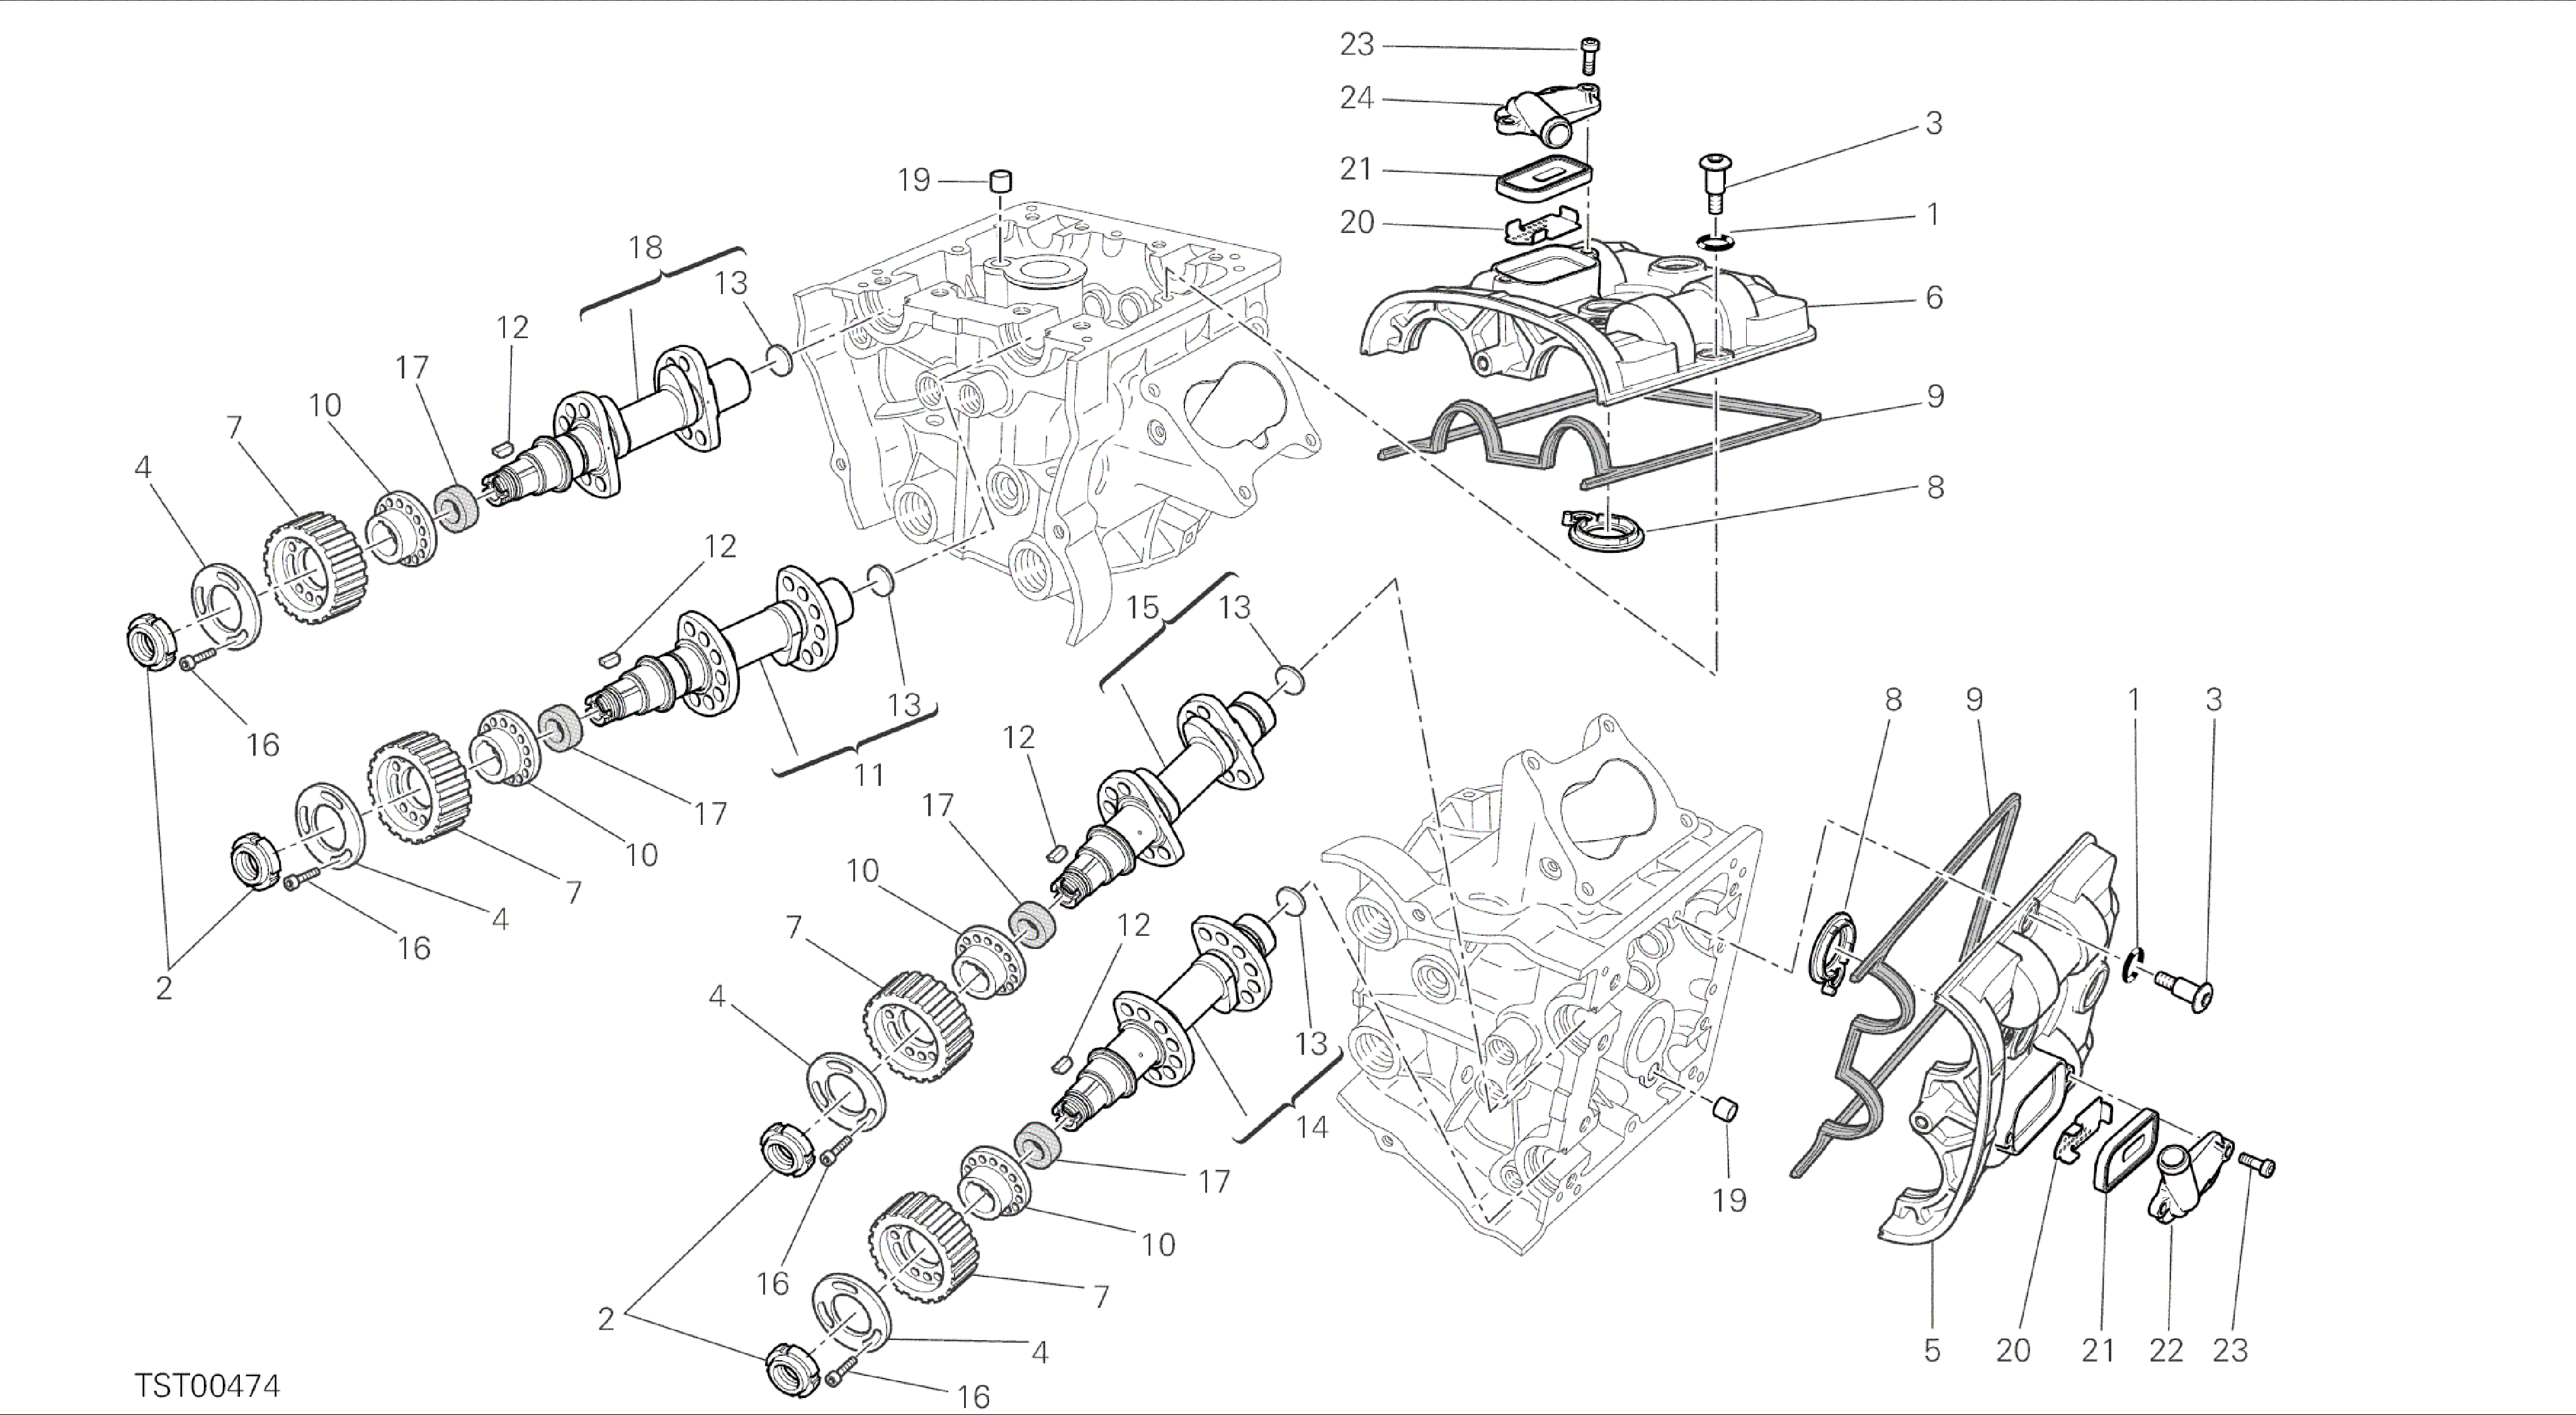 DRAWING 013 - CAMSHAFT [MOD:MS1200-A;XST:AUS,EUR,FRA,THA]GROUP ENGINE